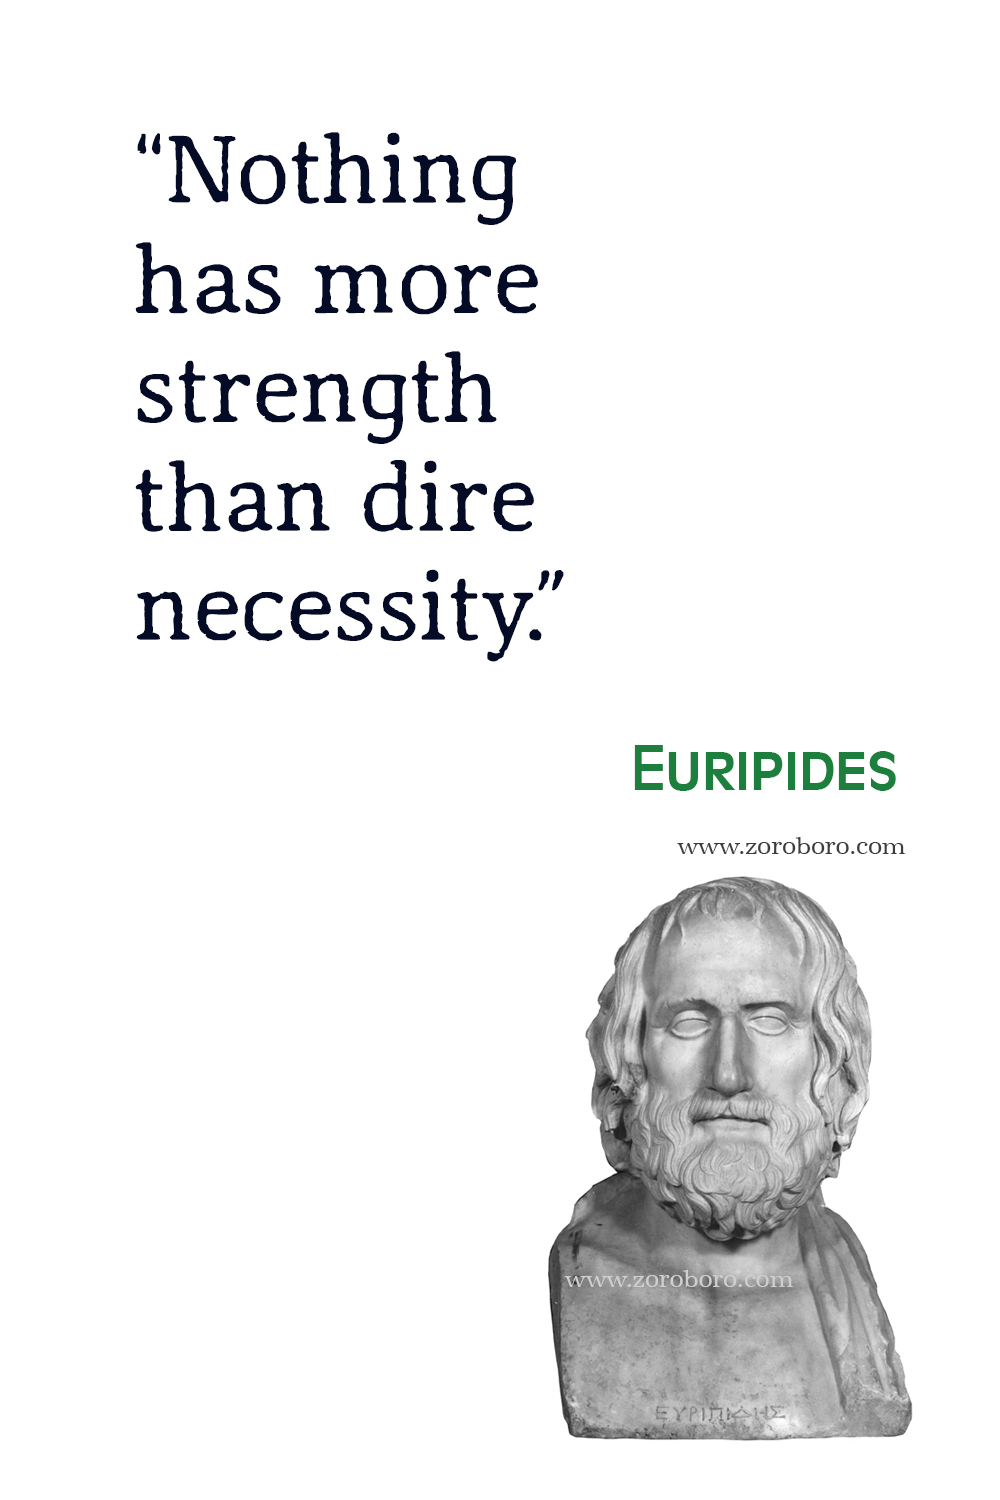 Euripides Quotes, Euripides Freedom, Liberty, Speak Quotes, Euripides Medea Quotes, Euripides Philosophy, Euripides The Bacchae Quotes